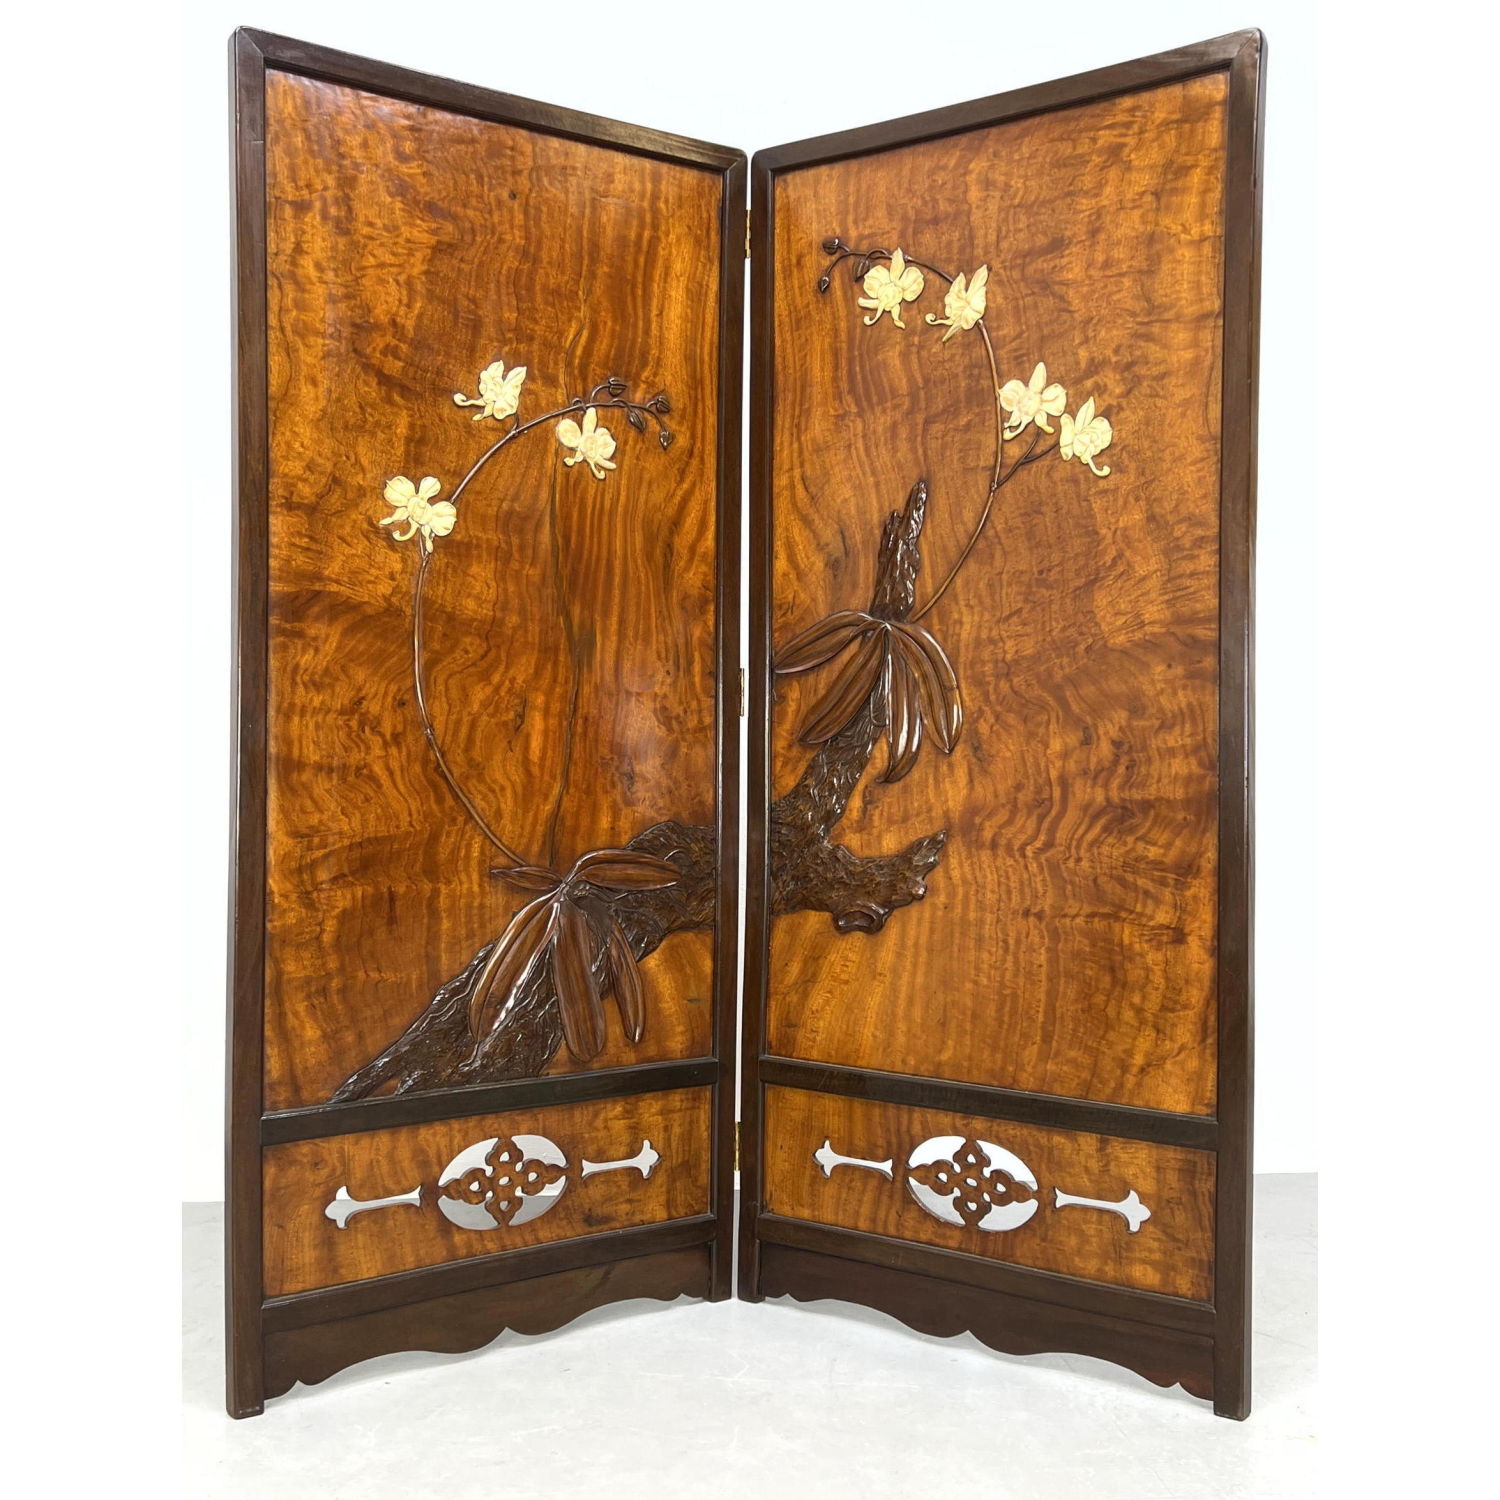 Asian Two Panel Screen Room Divider.